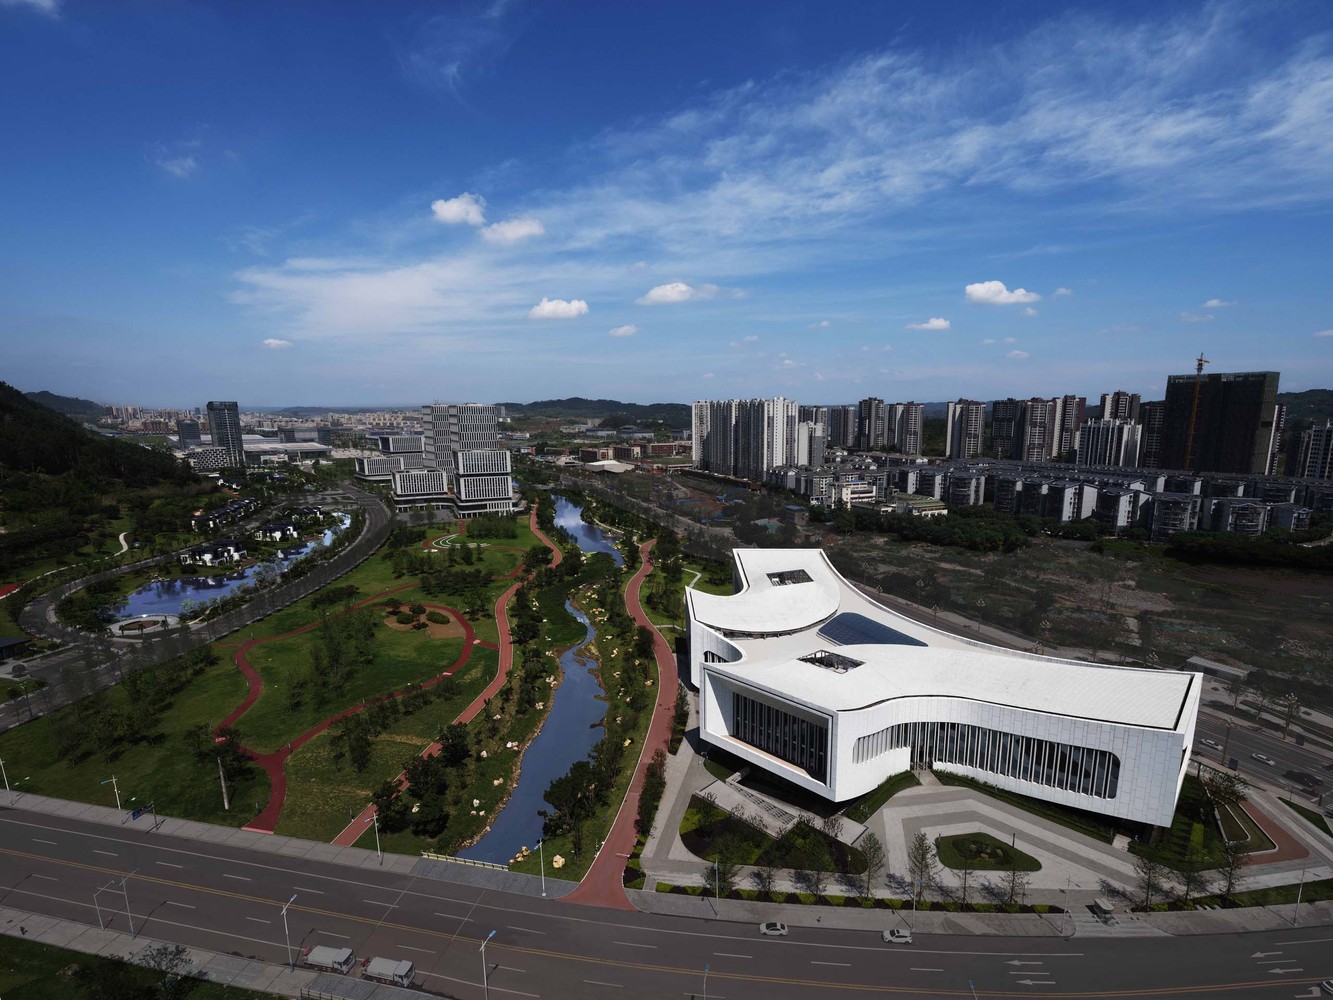 Yibin Science and Technology Museum